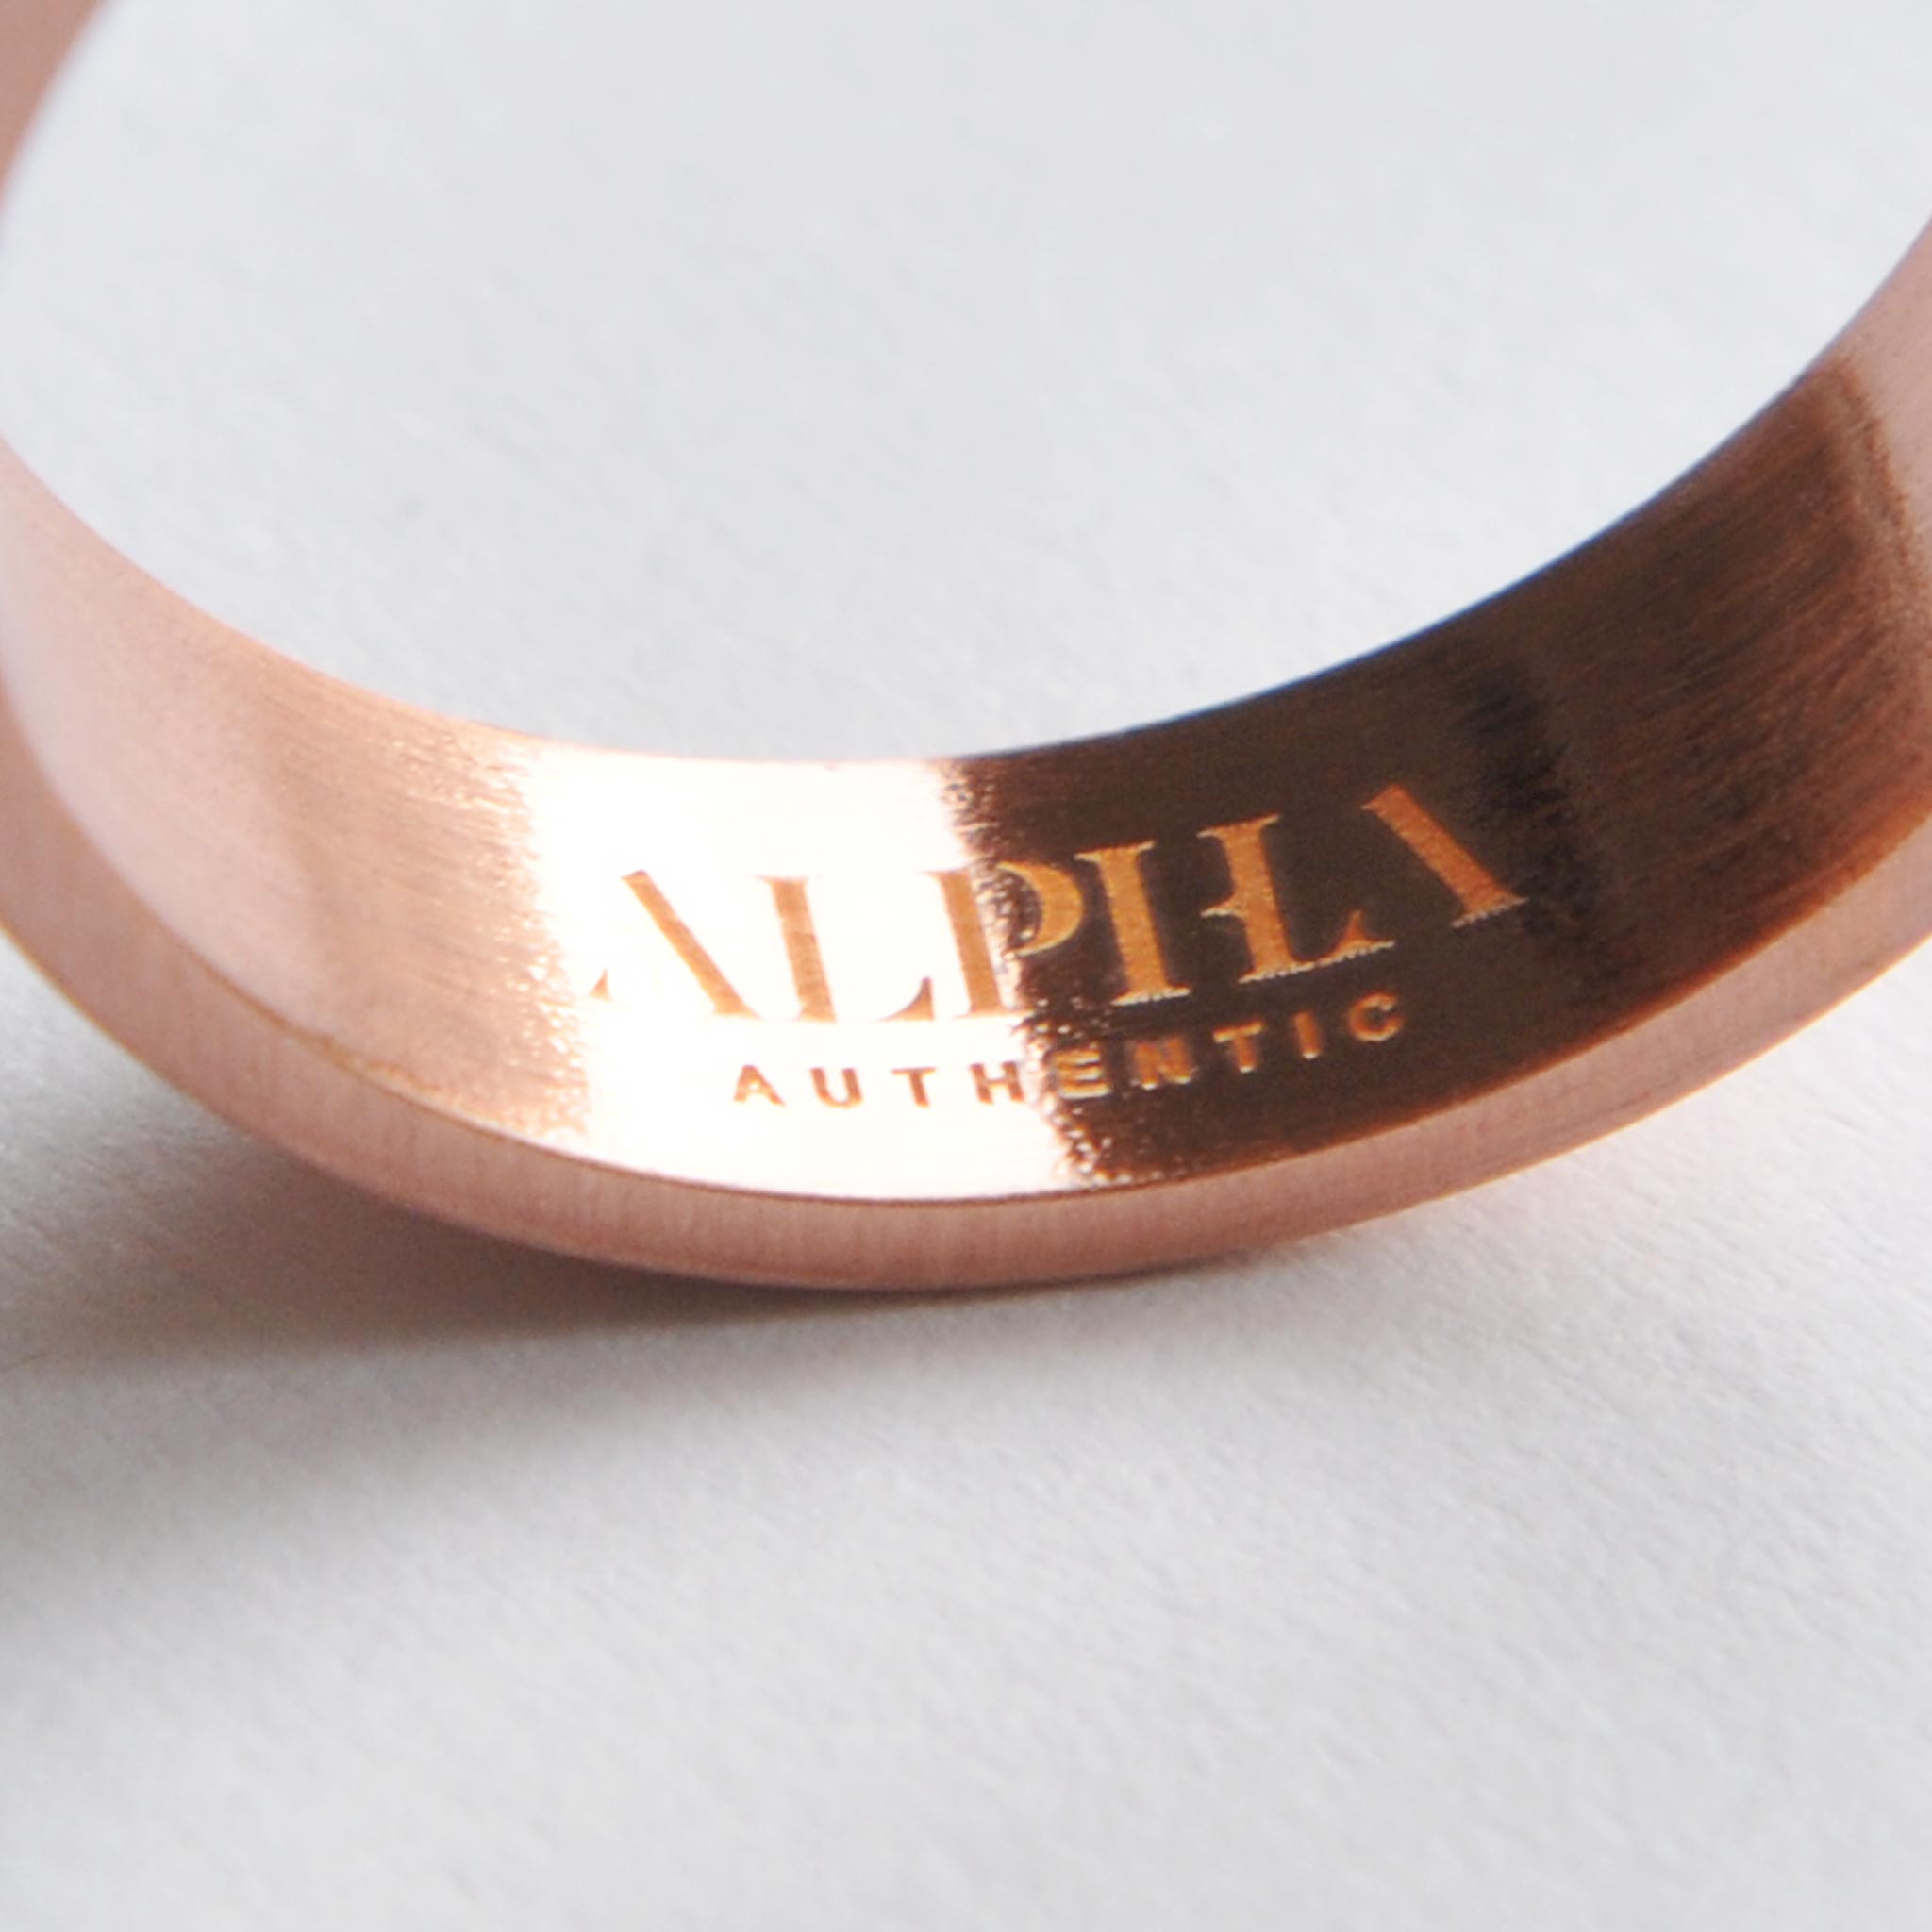 Copper magnetic ring